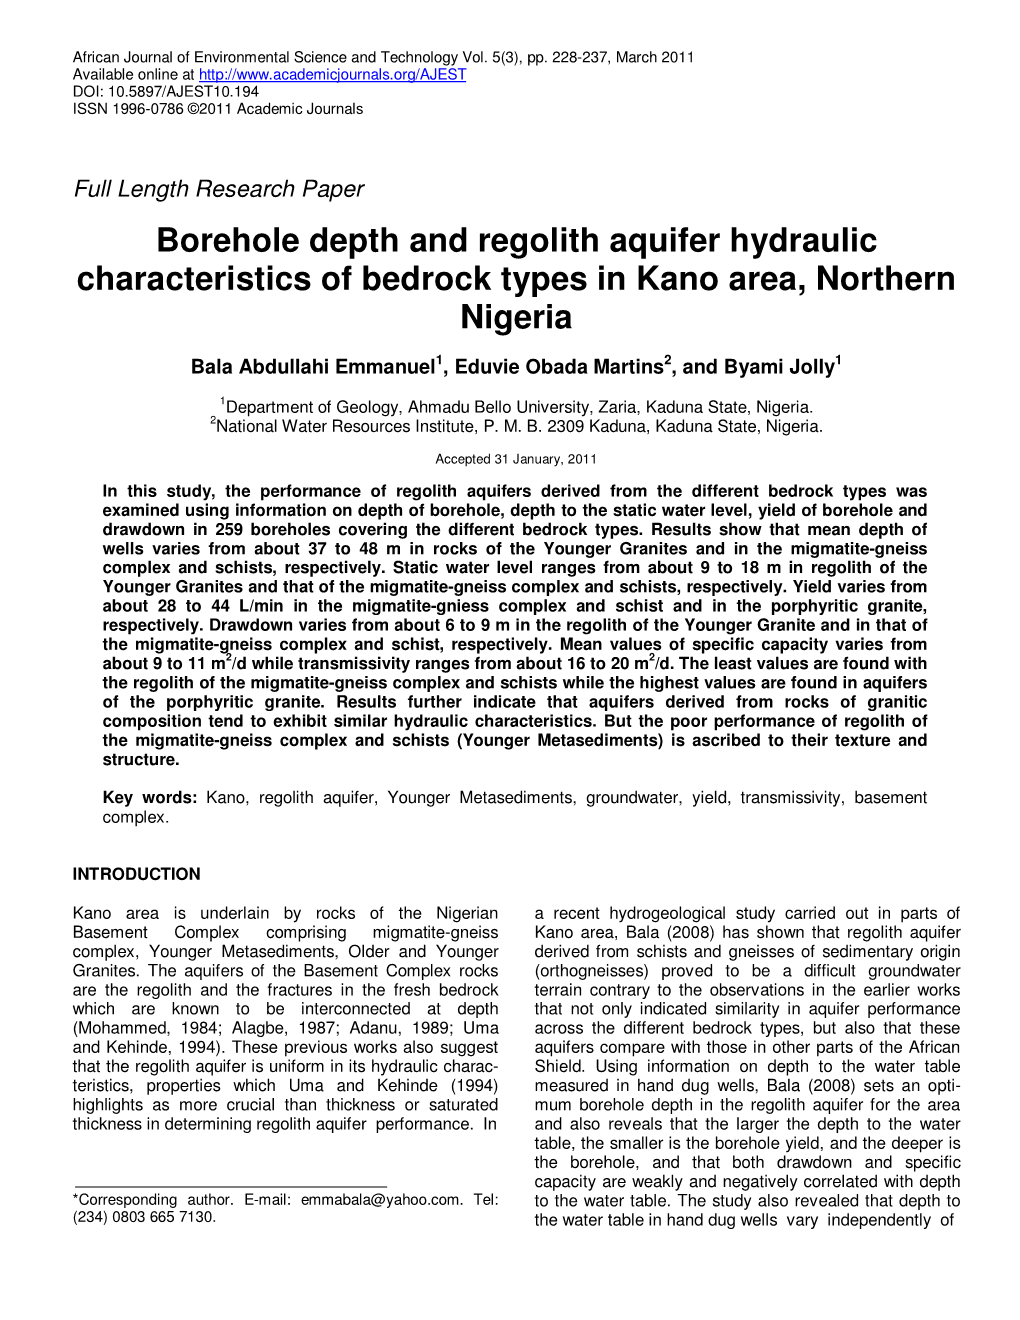 Borehole Depth and Regolith Aquifer Hydraulic Characteristics of Bedrock Types in Kano Area, Northern Nigeria